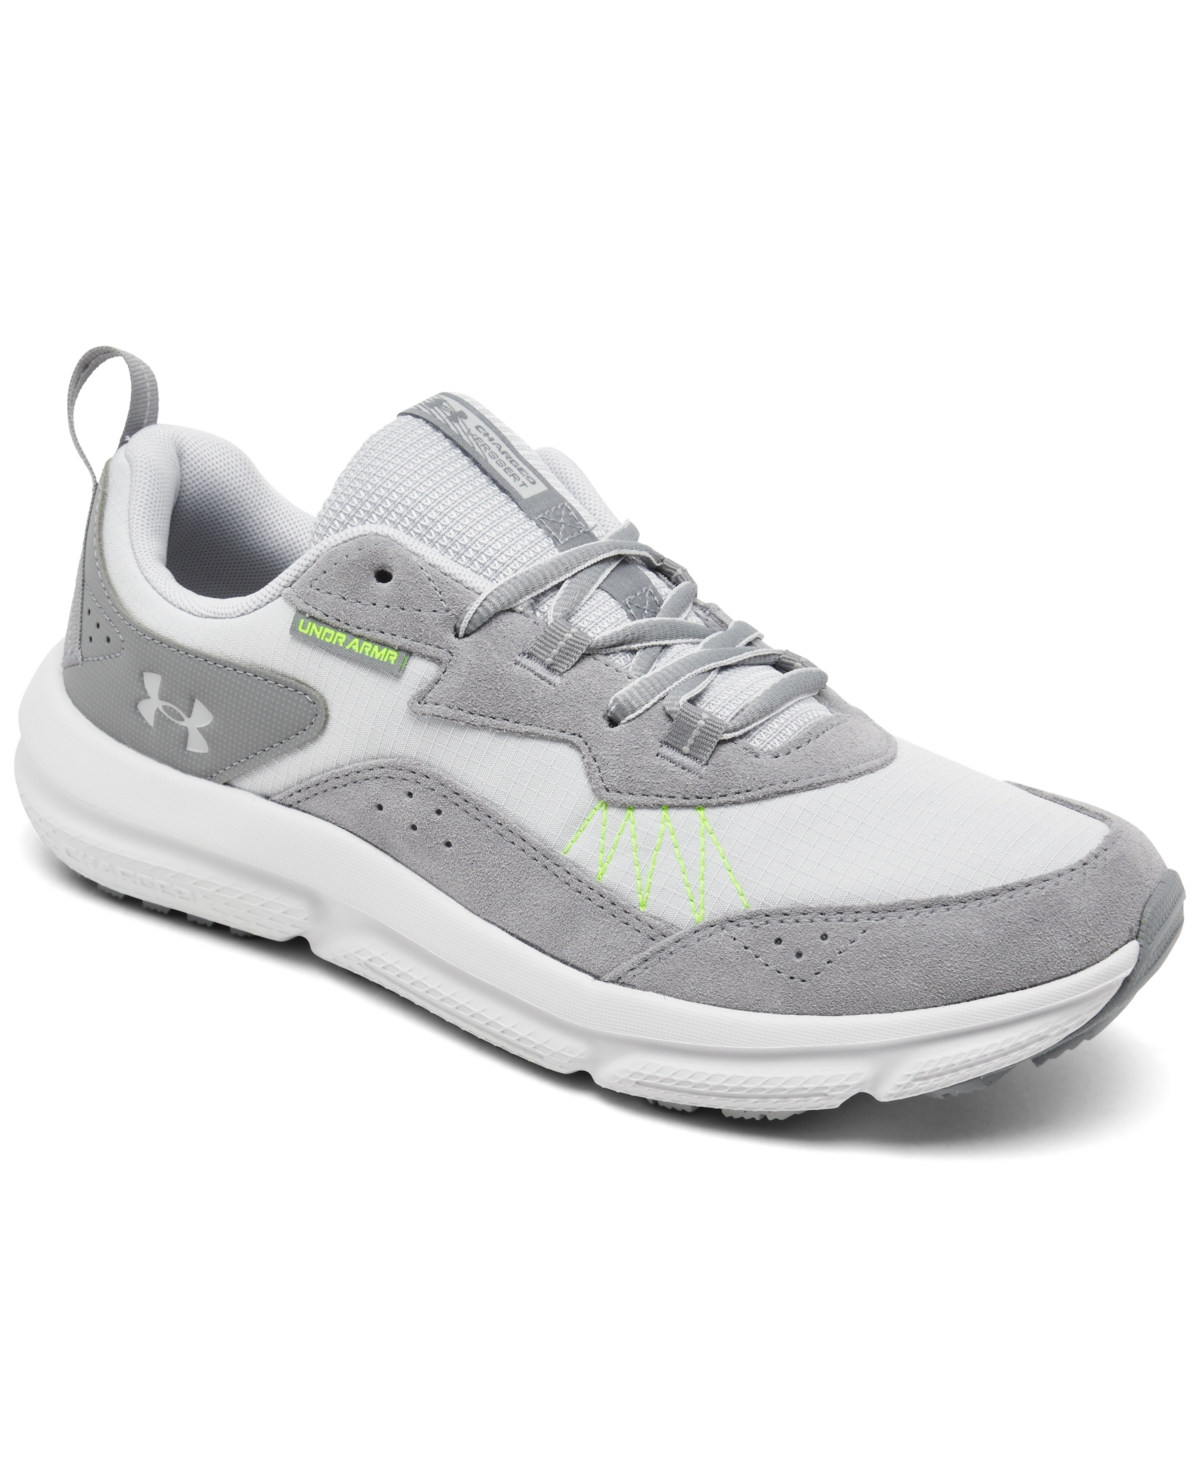 Men's Charged Verssert 2 Running Sneakers from Finish Line - Halo Grey